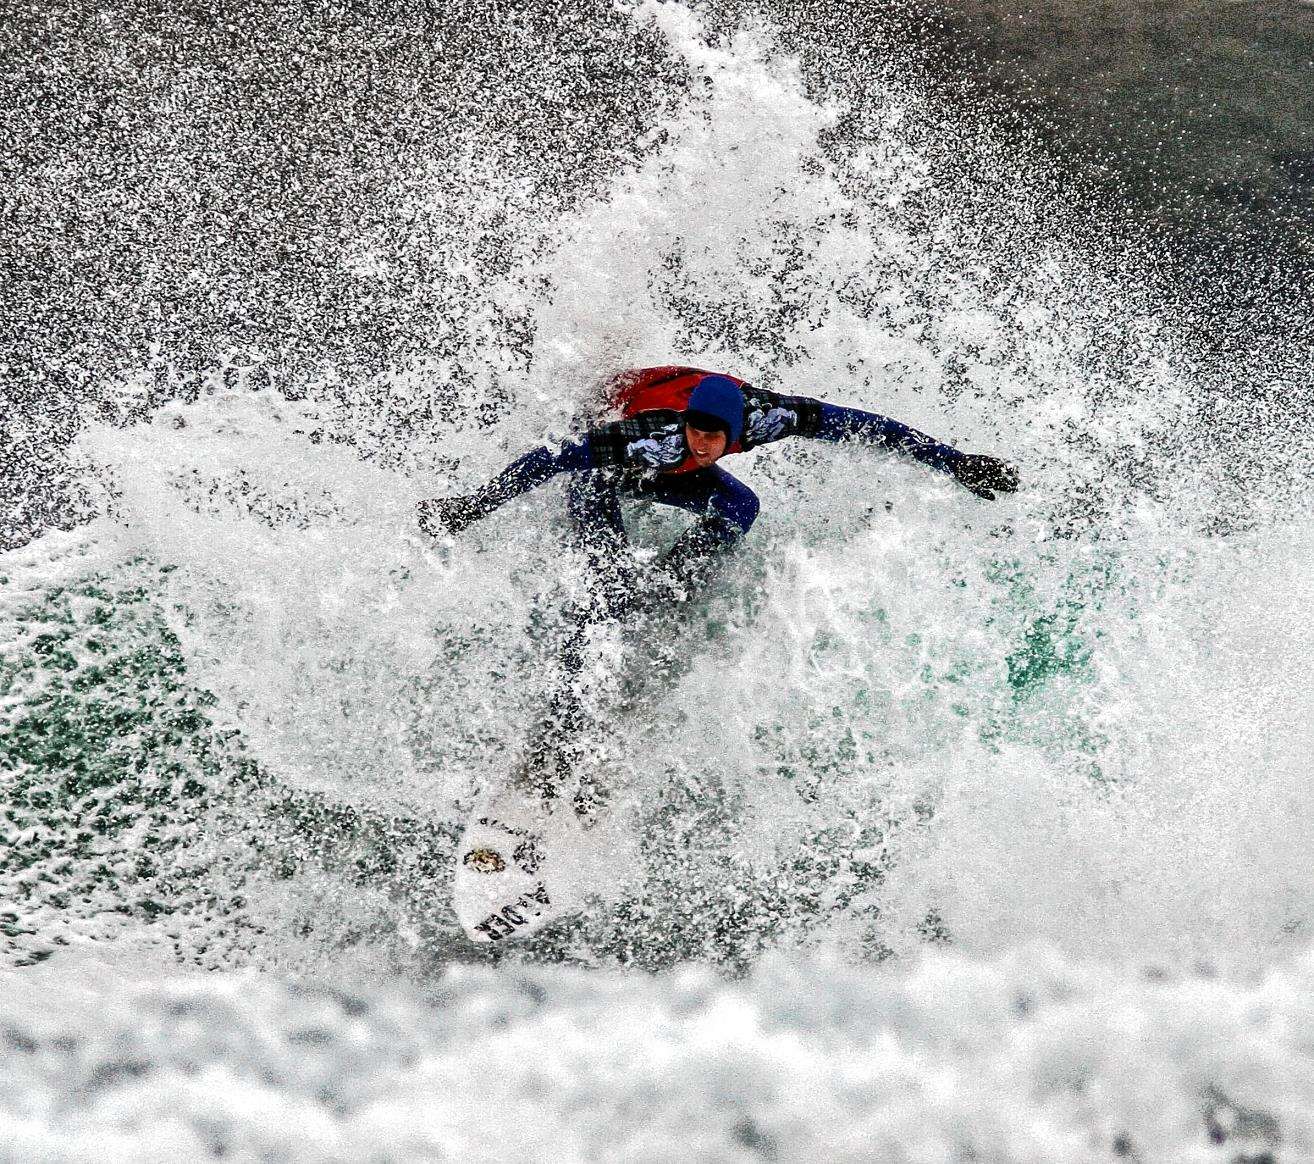 Mark Boyd is hoping to make a splash for Scottish surfing on the international stage.